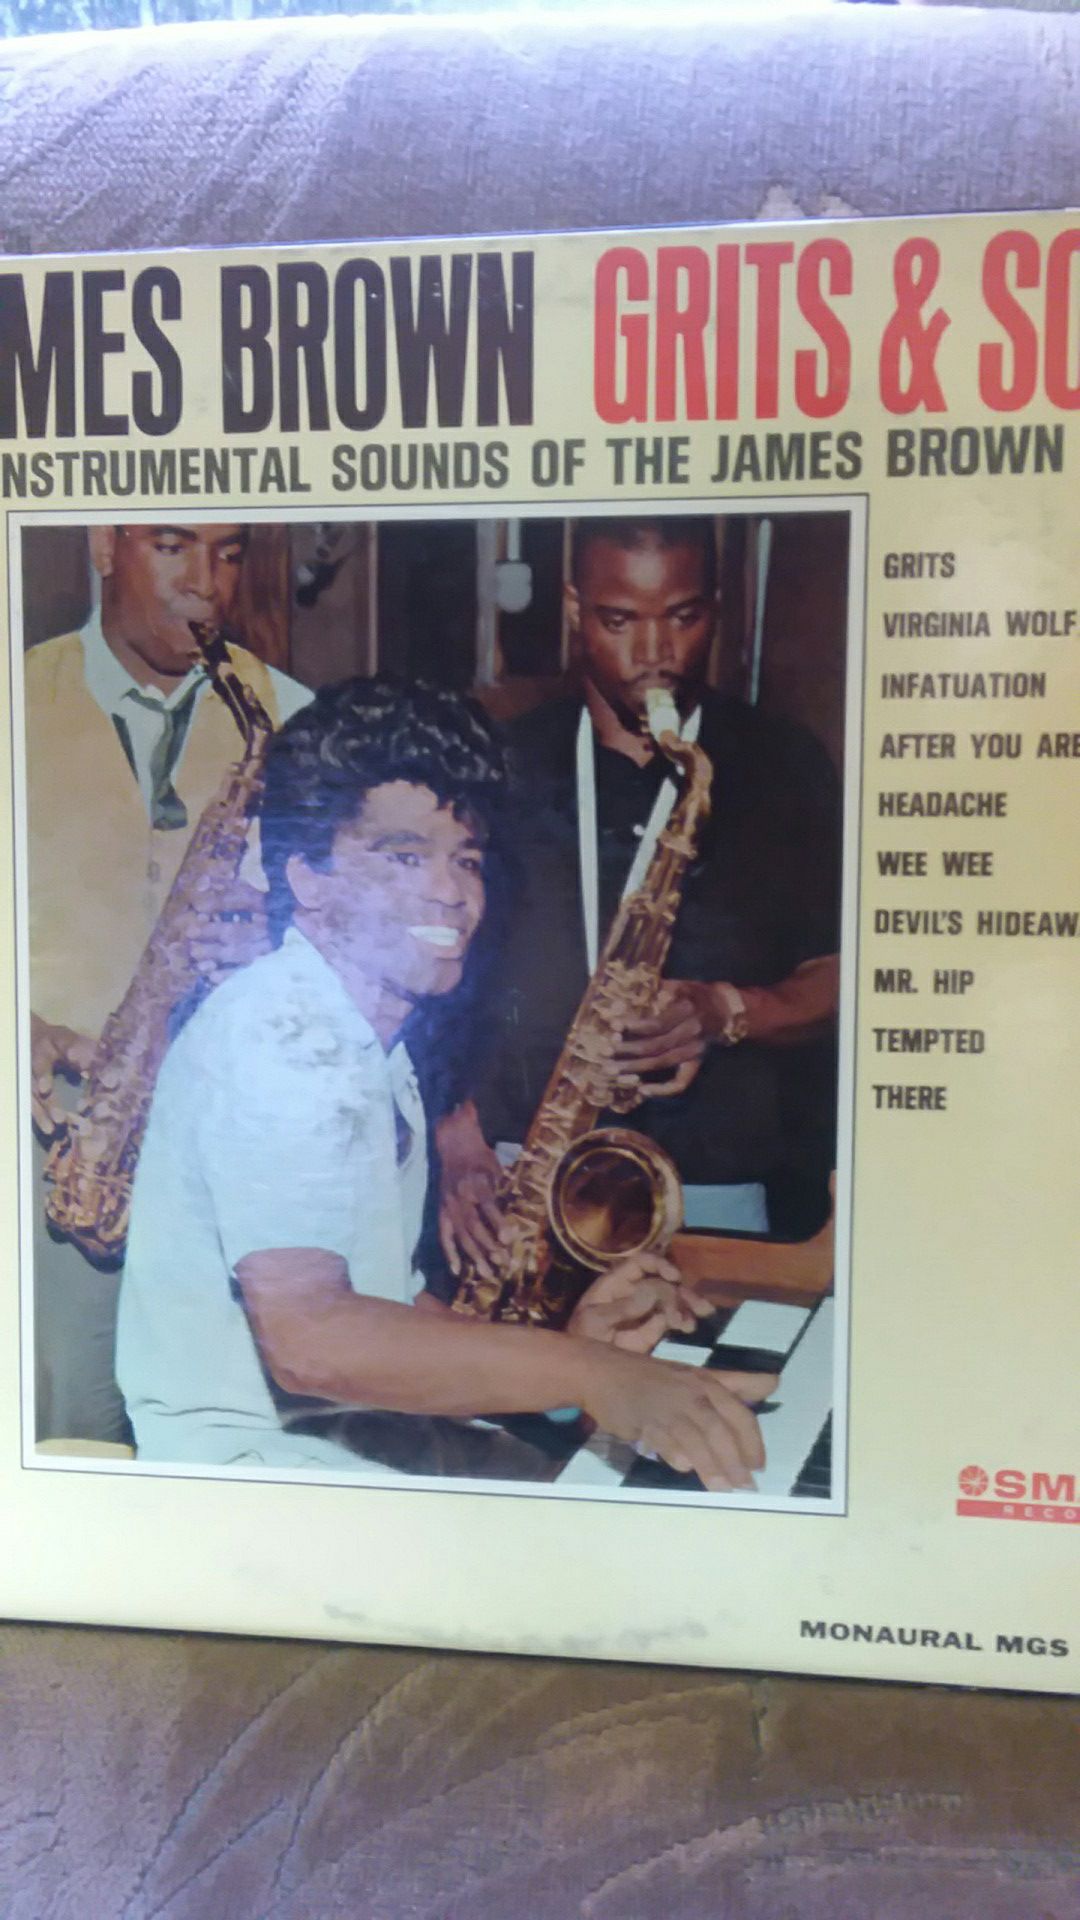 James Brown grits and soul the instrumental sounds of the James Brown Band Monaural MGS 27057